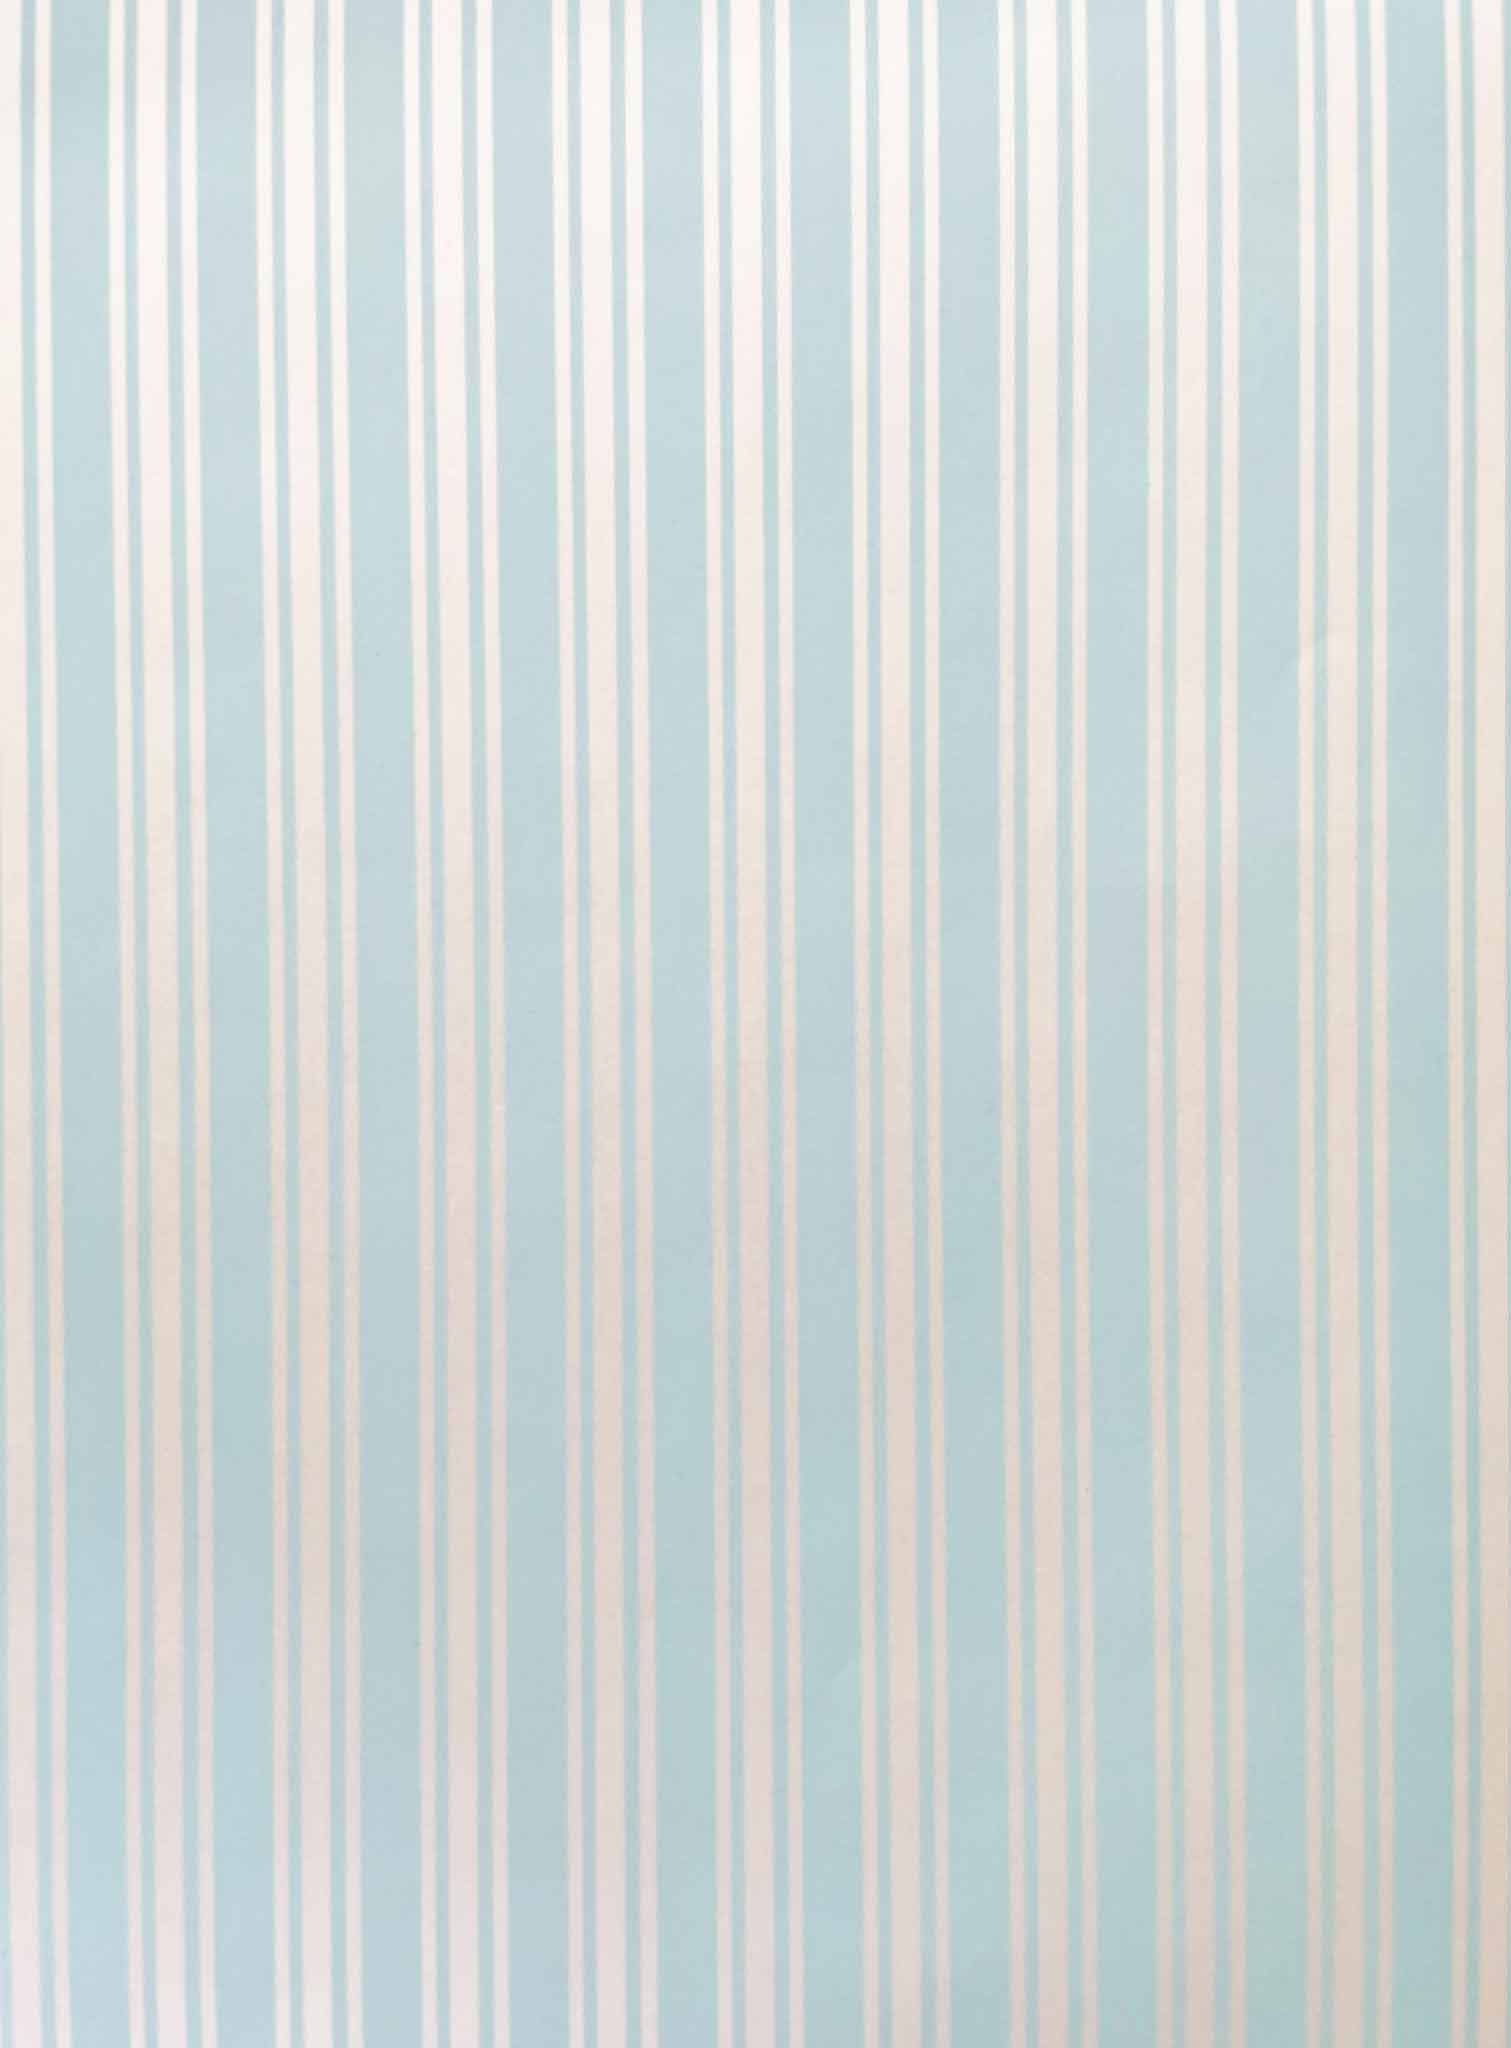 blue-and-white-stripy-paper